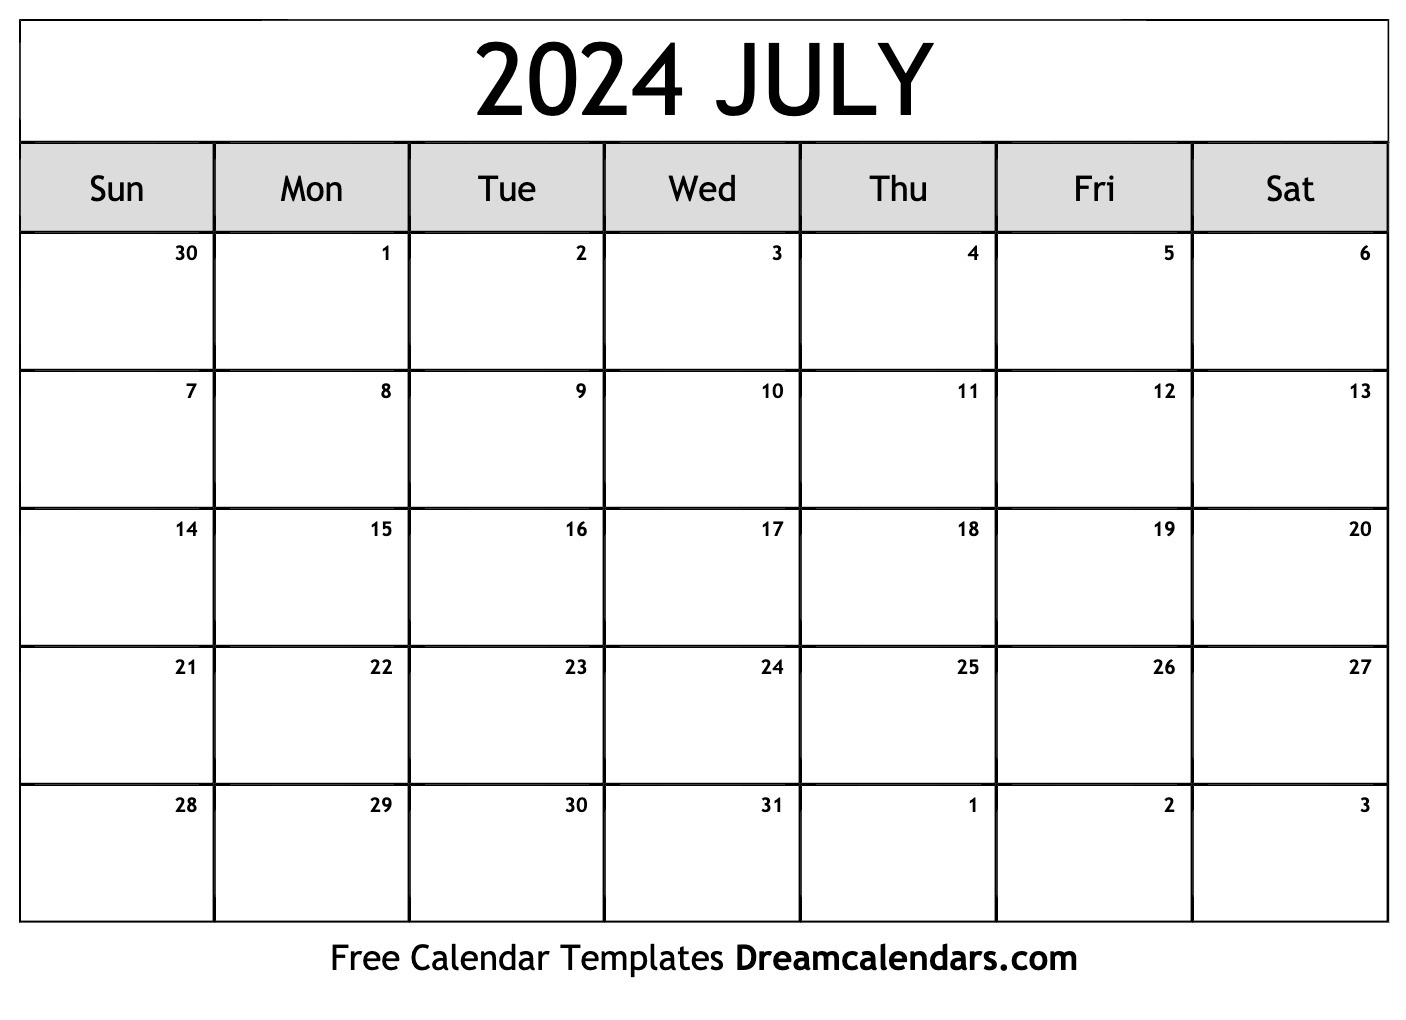 July 2024 Calendar - Free Printable With Holidays And Observances with regard to July Calendar Word 2024